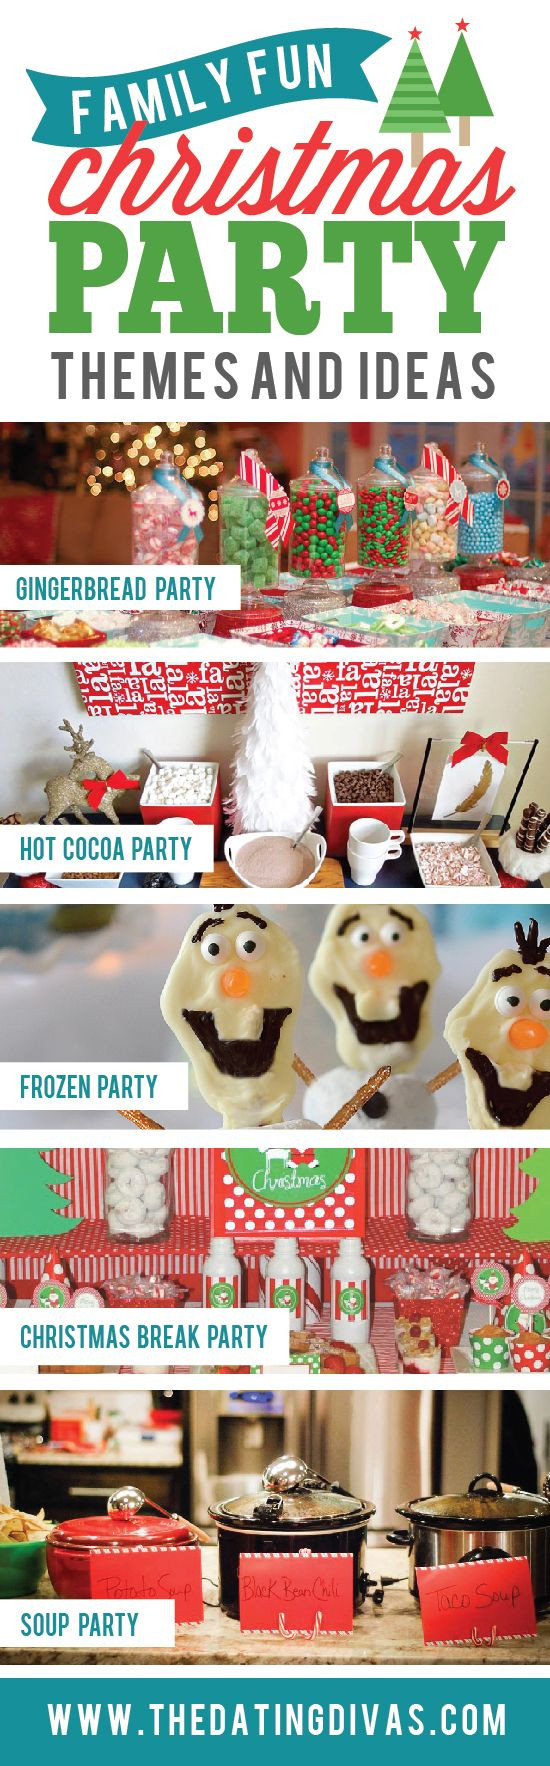 Funny Christmas Theme Party Ideas
 Best 25 Christmas party themes ideas on Pinterest